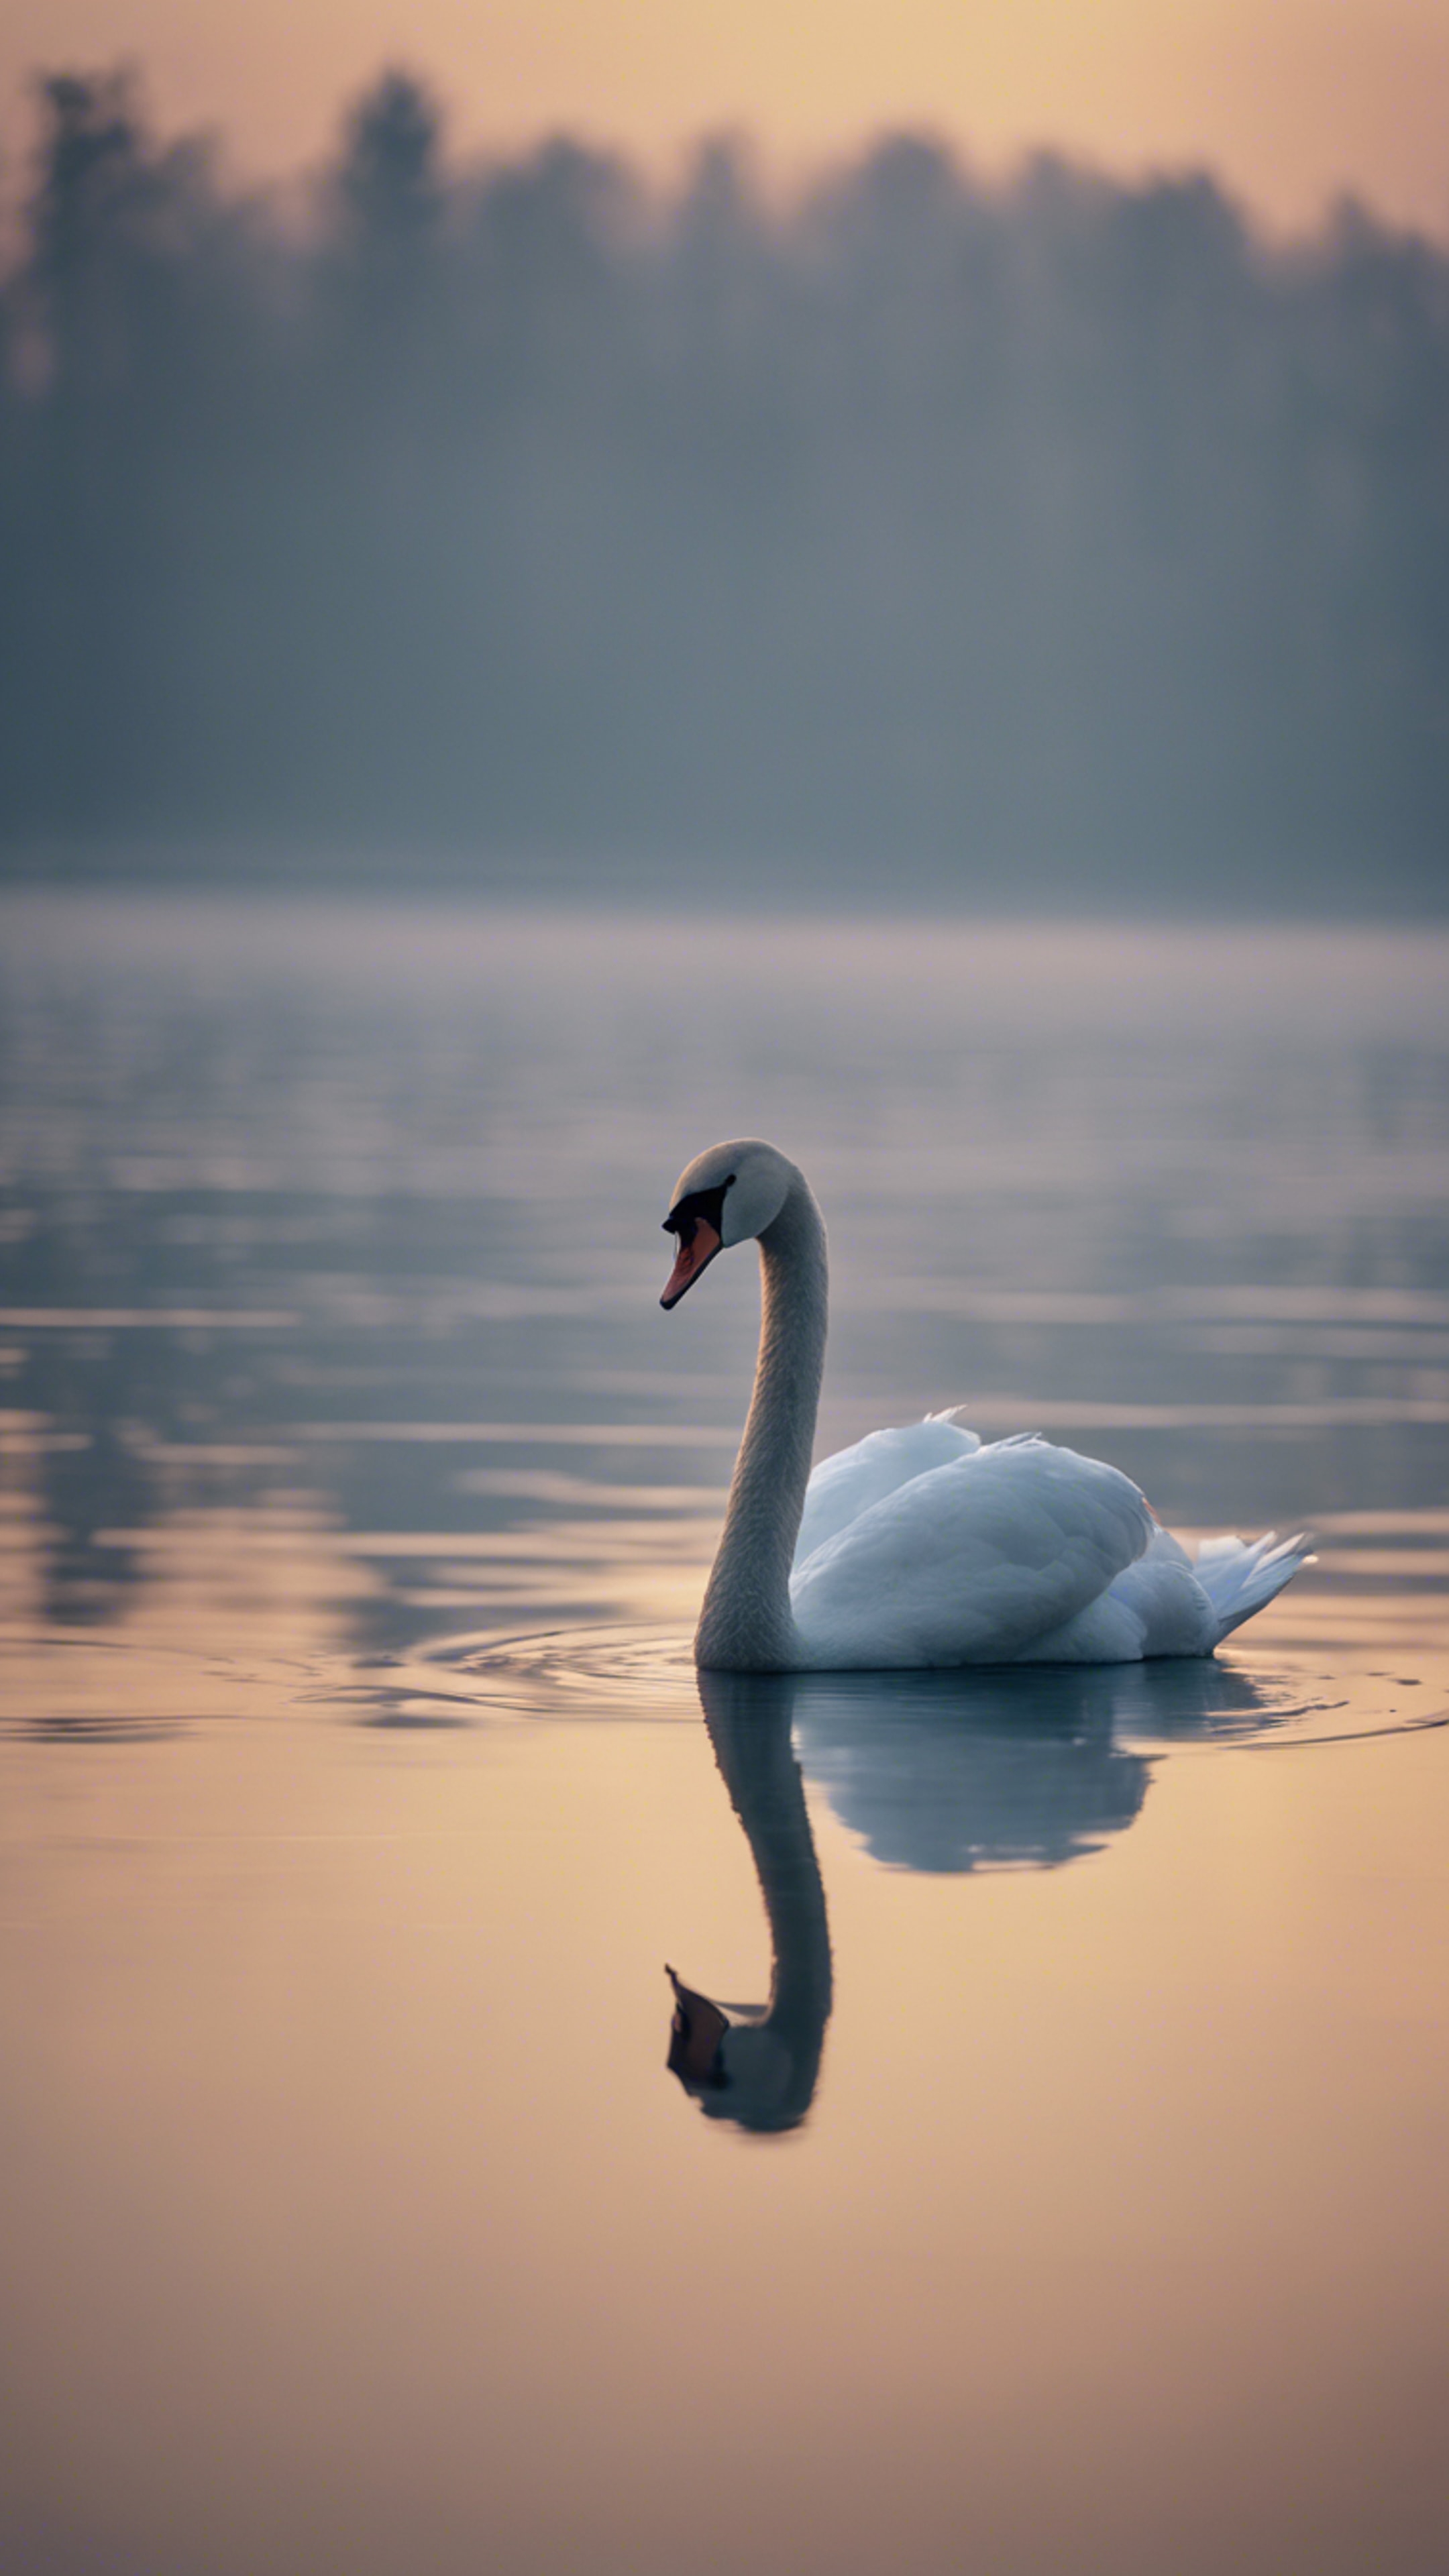 A single love-struck swan swimming alone in a desolate lake under the pallid glow of a gloomy moon. Wallpaper[674930fc7c9f467a8426]